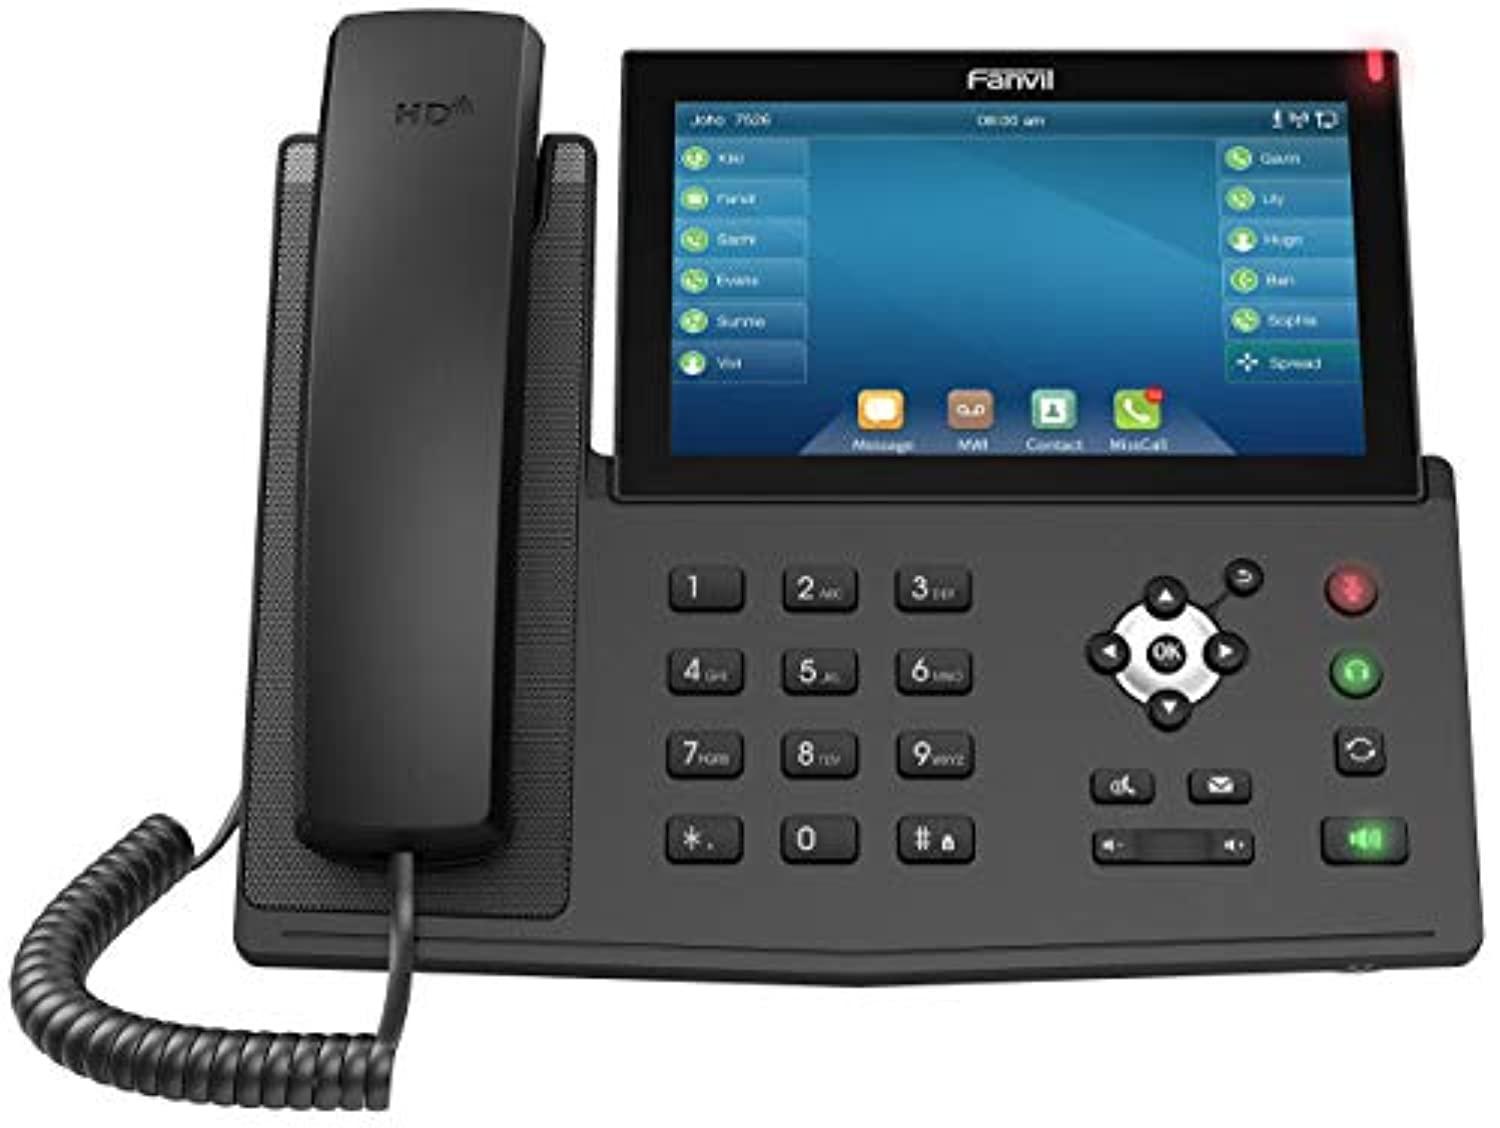 fanvil x7 enterprise voip phone, 7-inch color touch screen, 20 sip lines, power adapter not included (renewed)